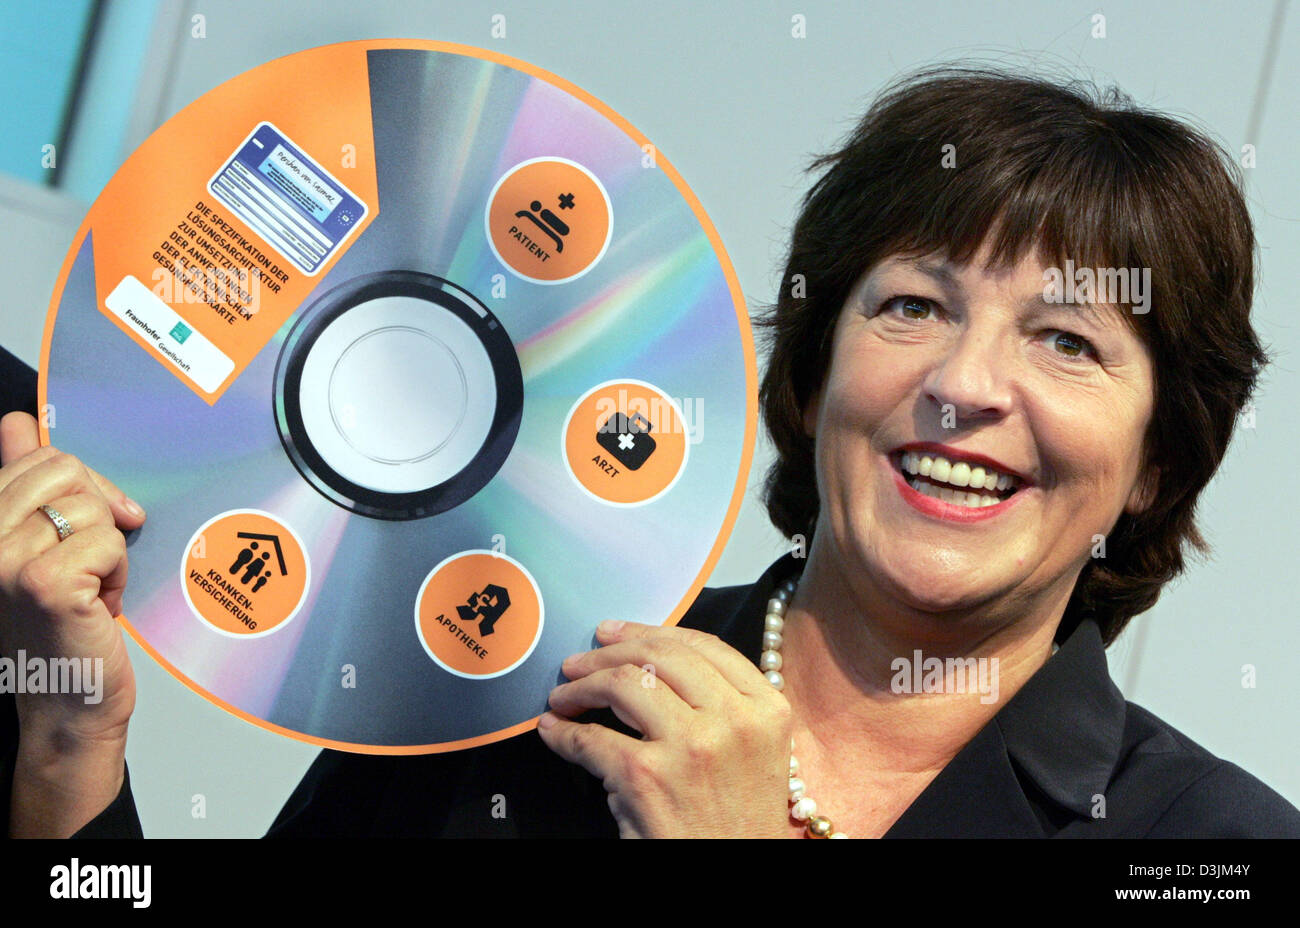 (dpa) - Ulla Schmidt, German Minister for Health and Social Issues, presents the solution architecture for the electronical health card in form of a gigantic CD at the world's largest computer fair CeBIT in Hanover, Germany, 14 March 2005. The planned electronical health card takes on further shape. Prior to the event the Fraunhofer institute for software and system technology gave Stock Photo